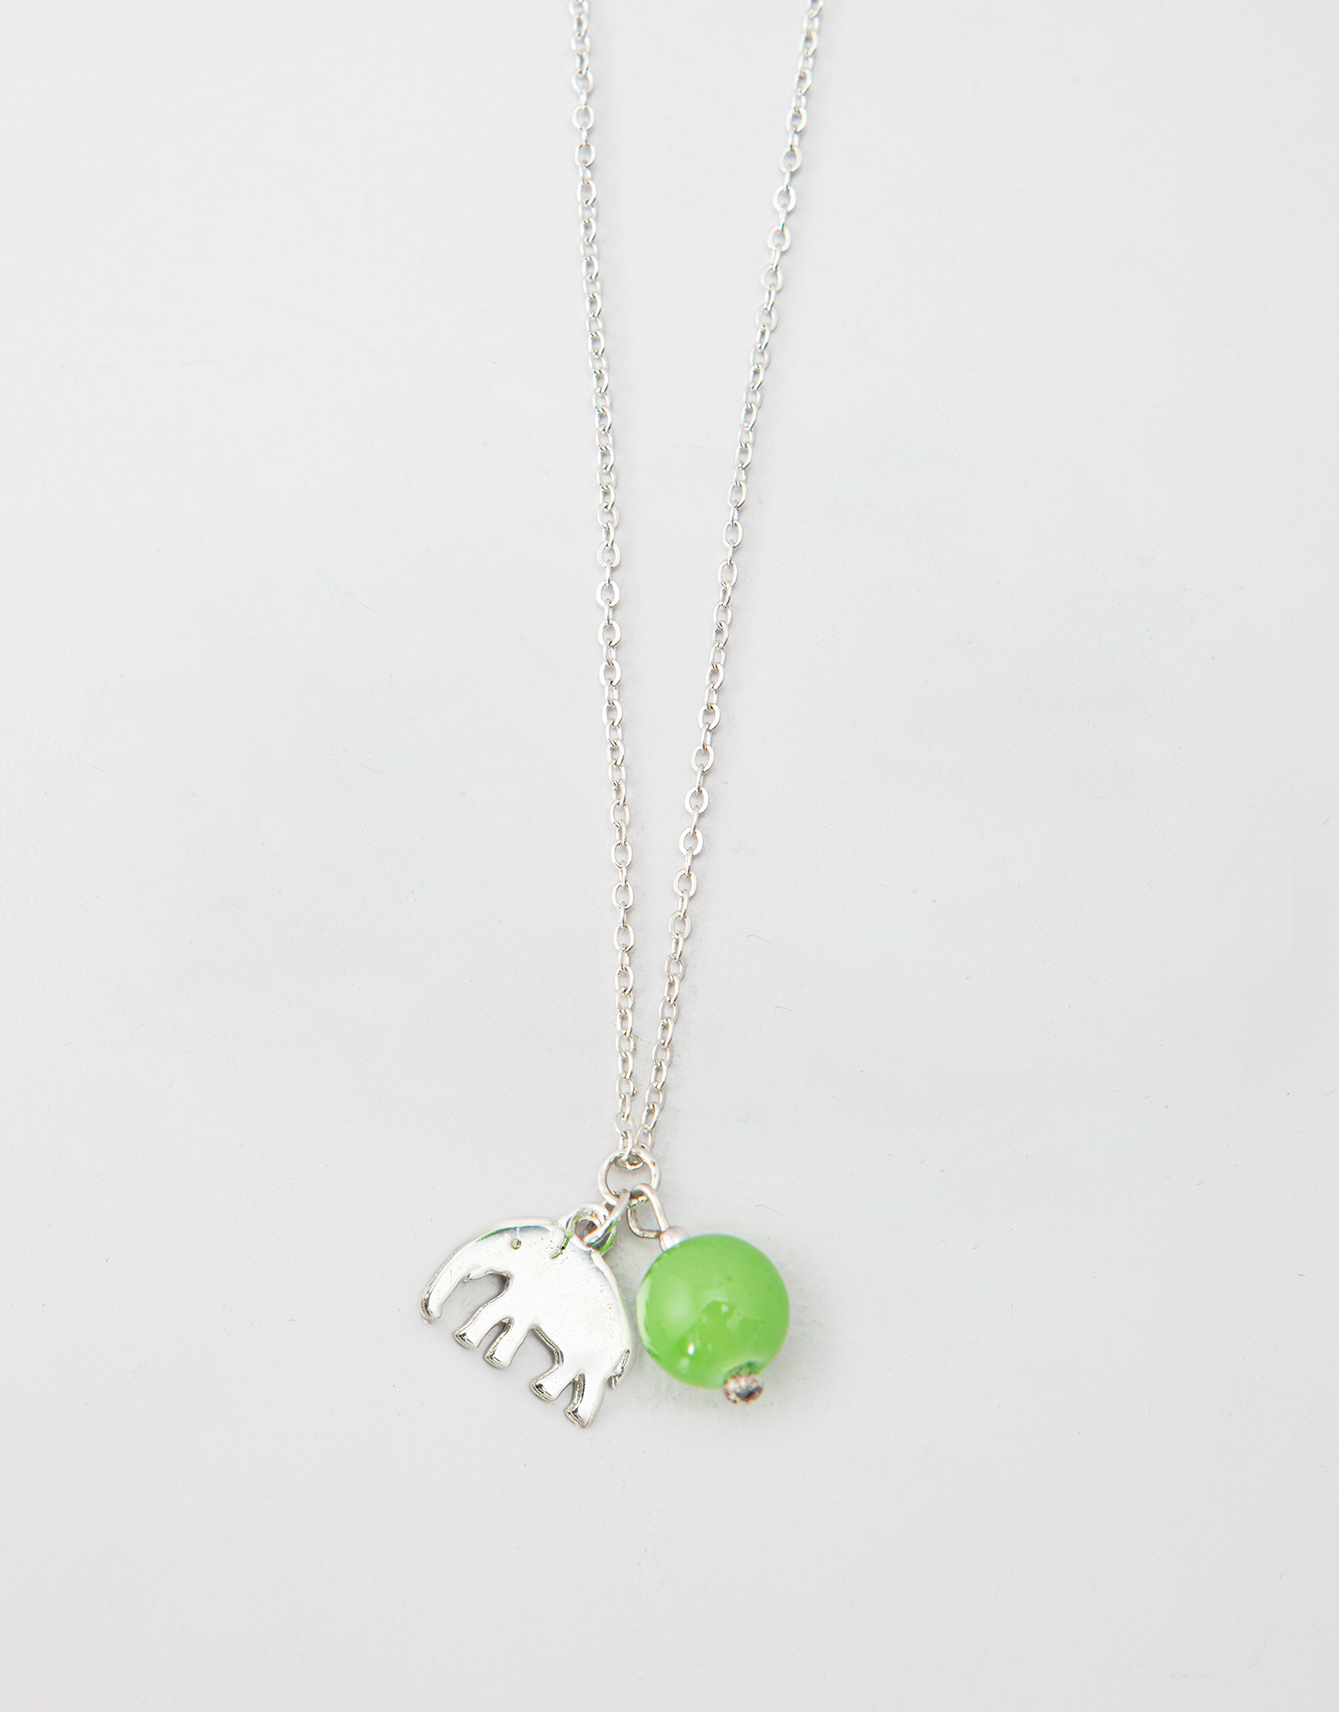 Charity necklace Image 0